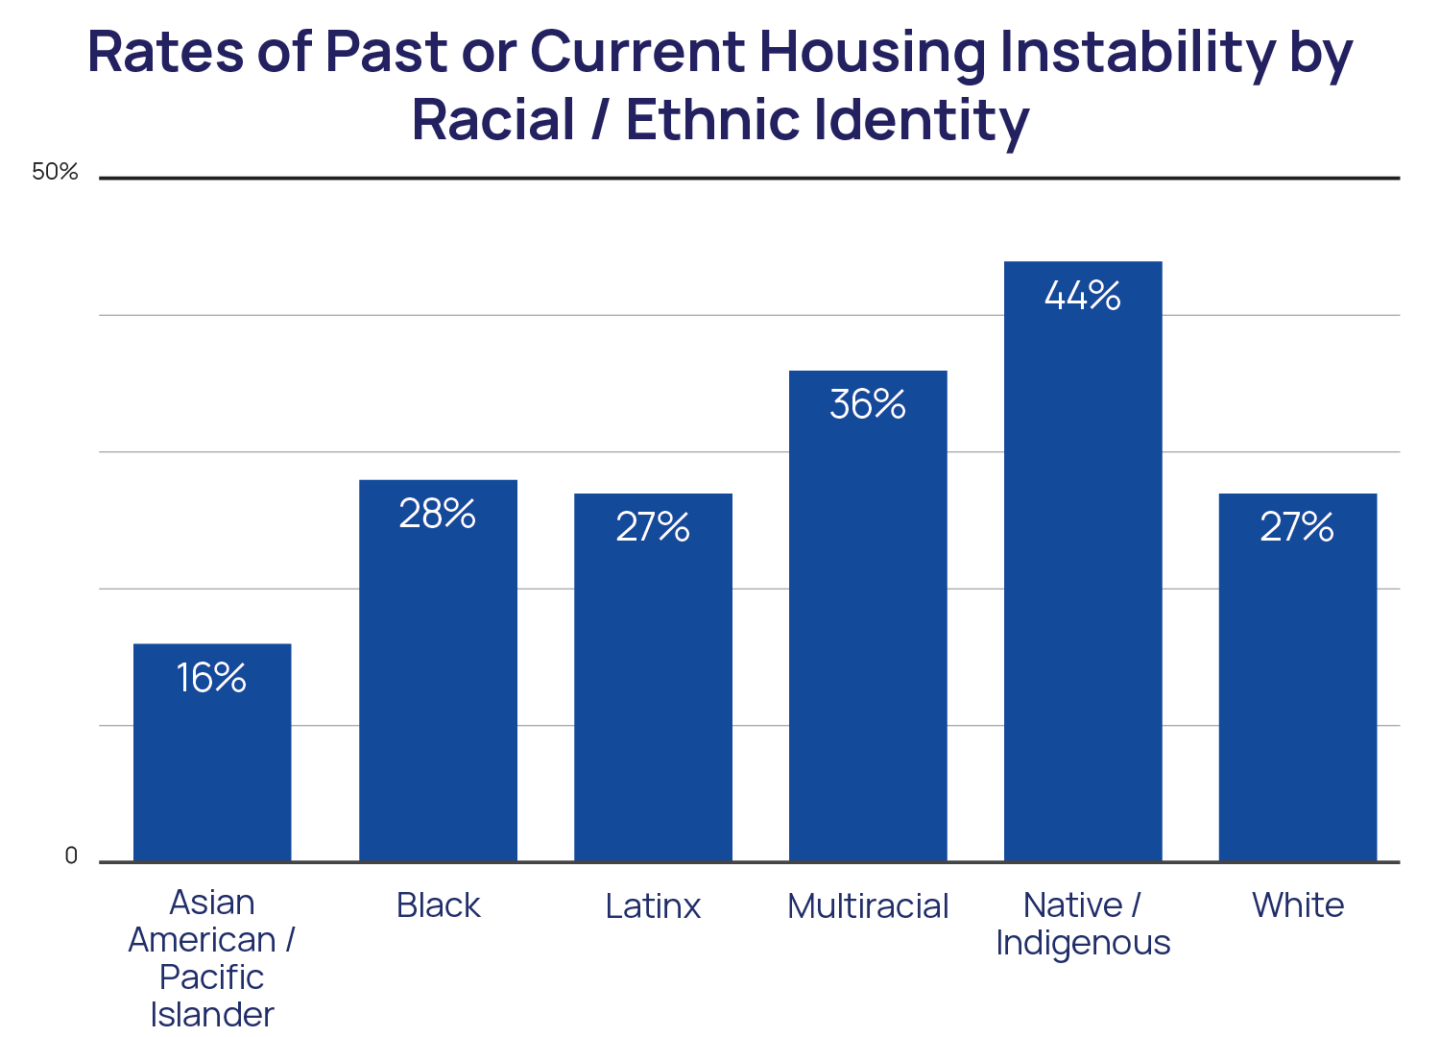 Rates of Past or Current Housing Instability by Racial/Ethnic Identity Bar Chart